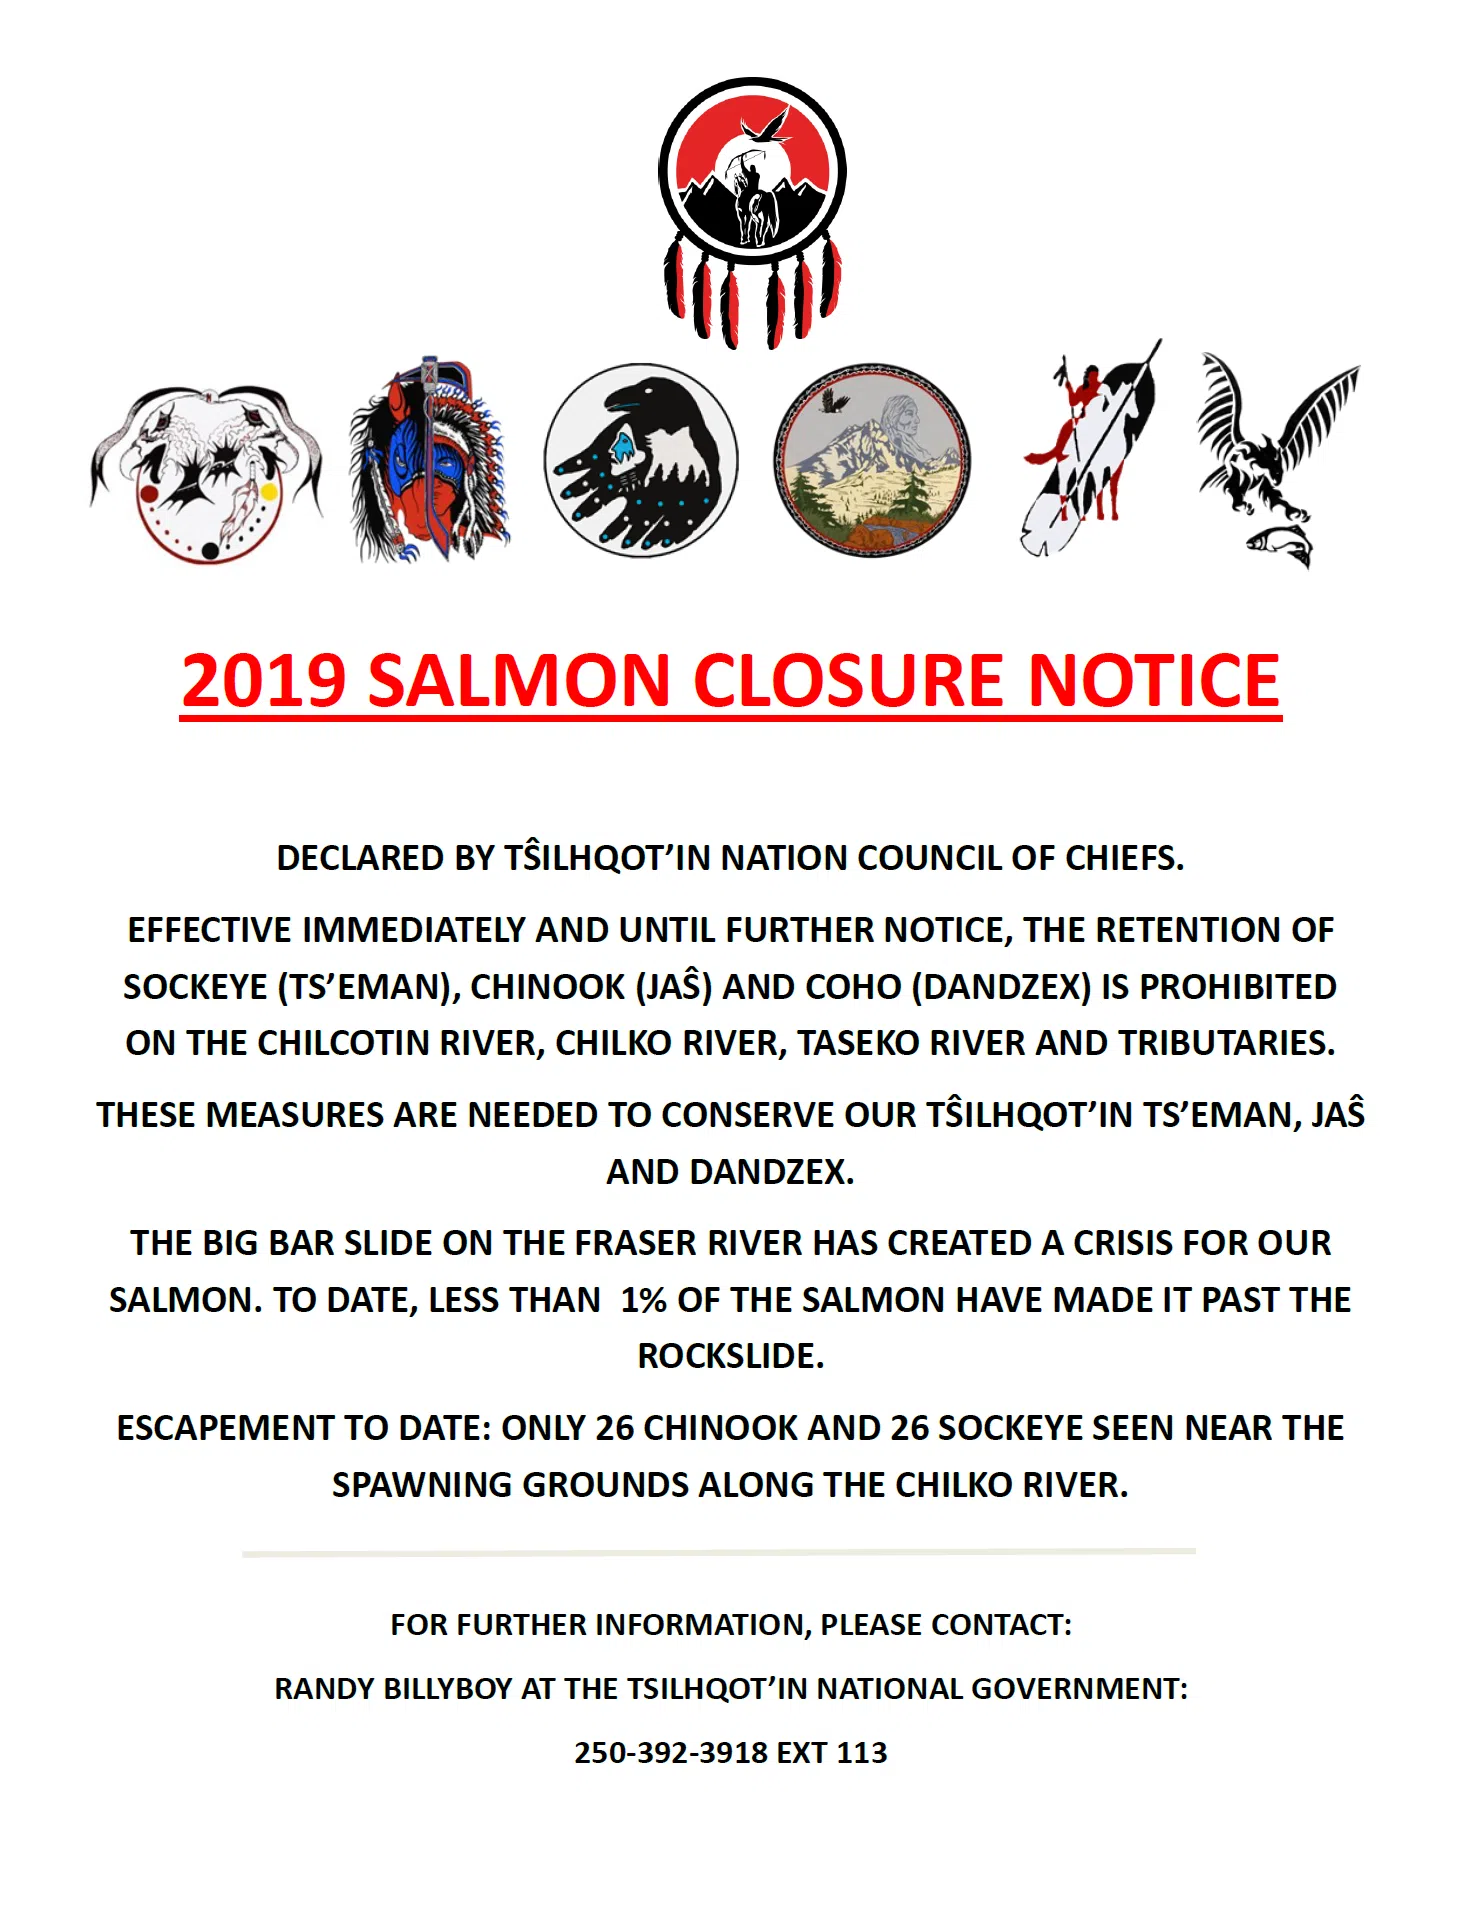 Tŝilhqot’in National Government issues salmon closure due to Fraser